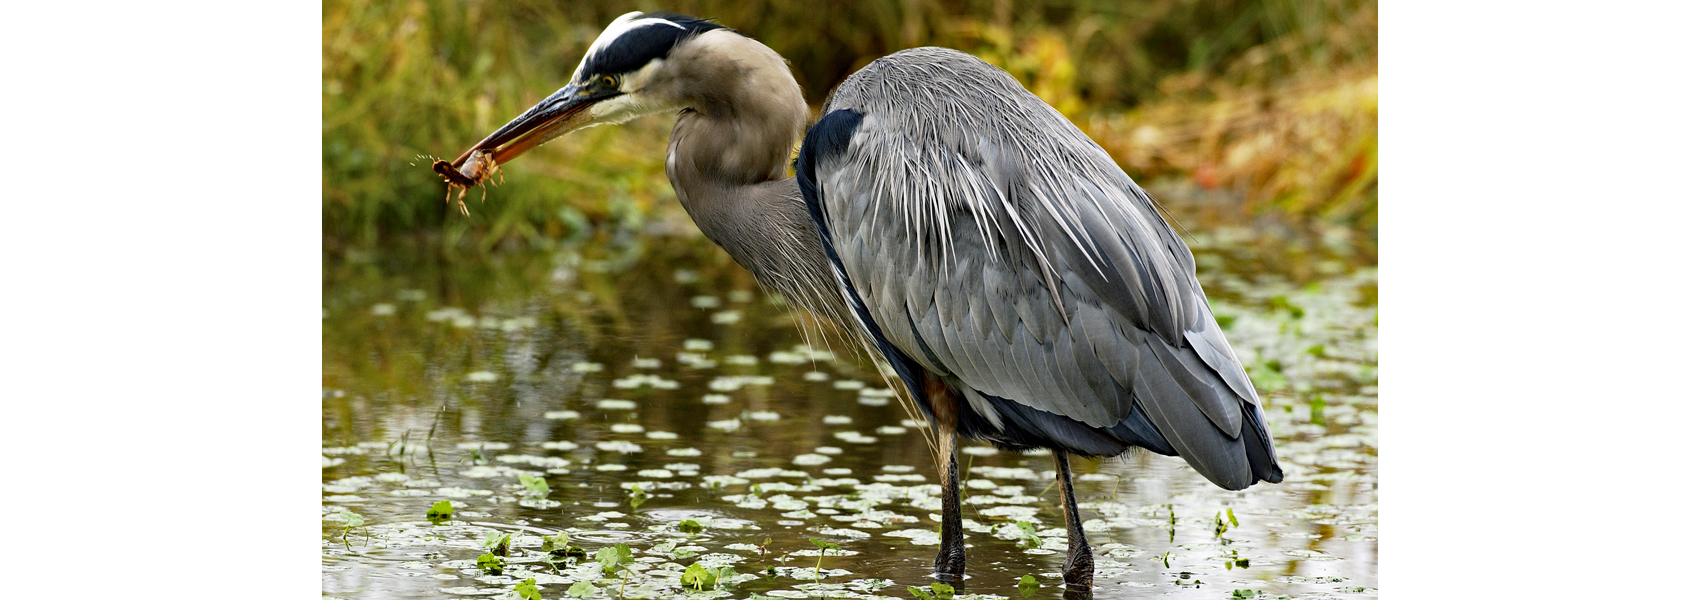 A great blue heron with a crawfish in its bill